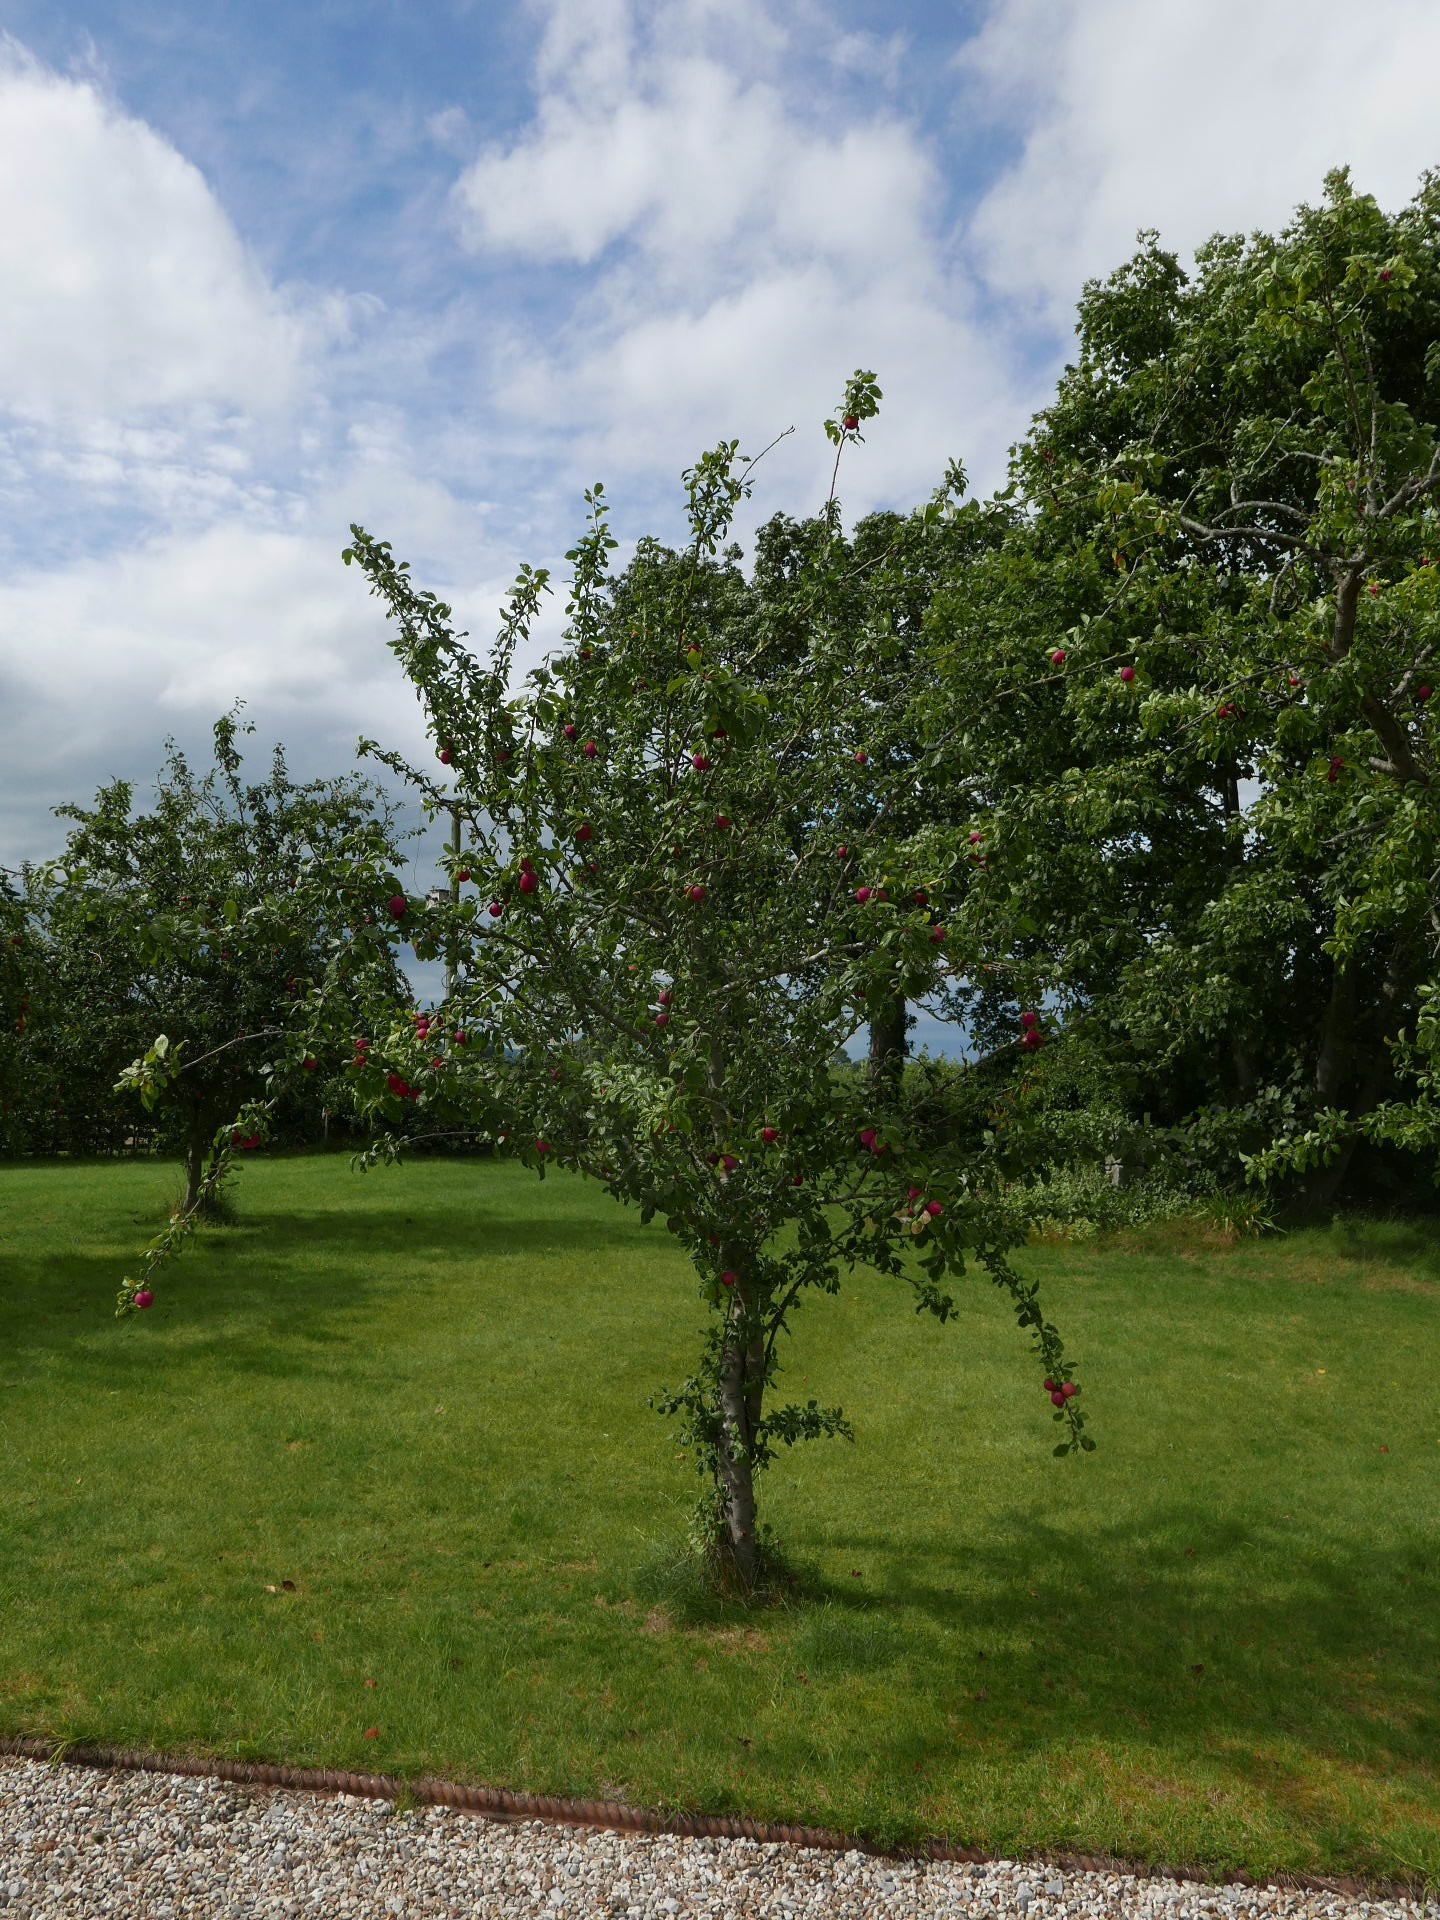 The Vale of Clwyd Denbigh Plum Cluster – Horticulture Wales